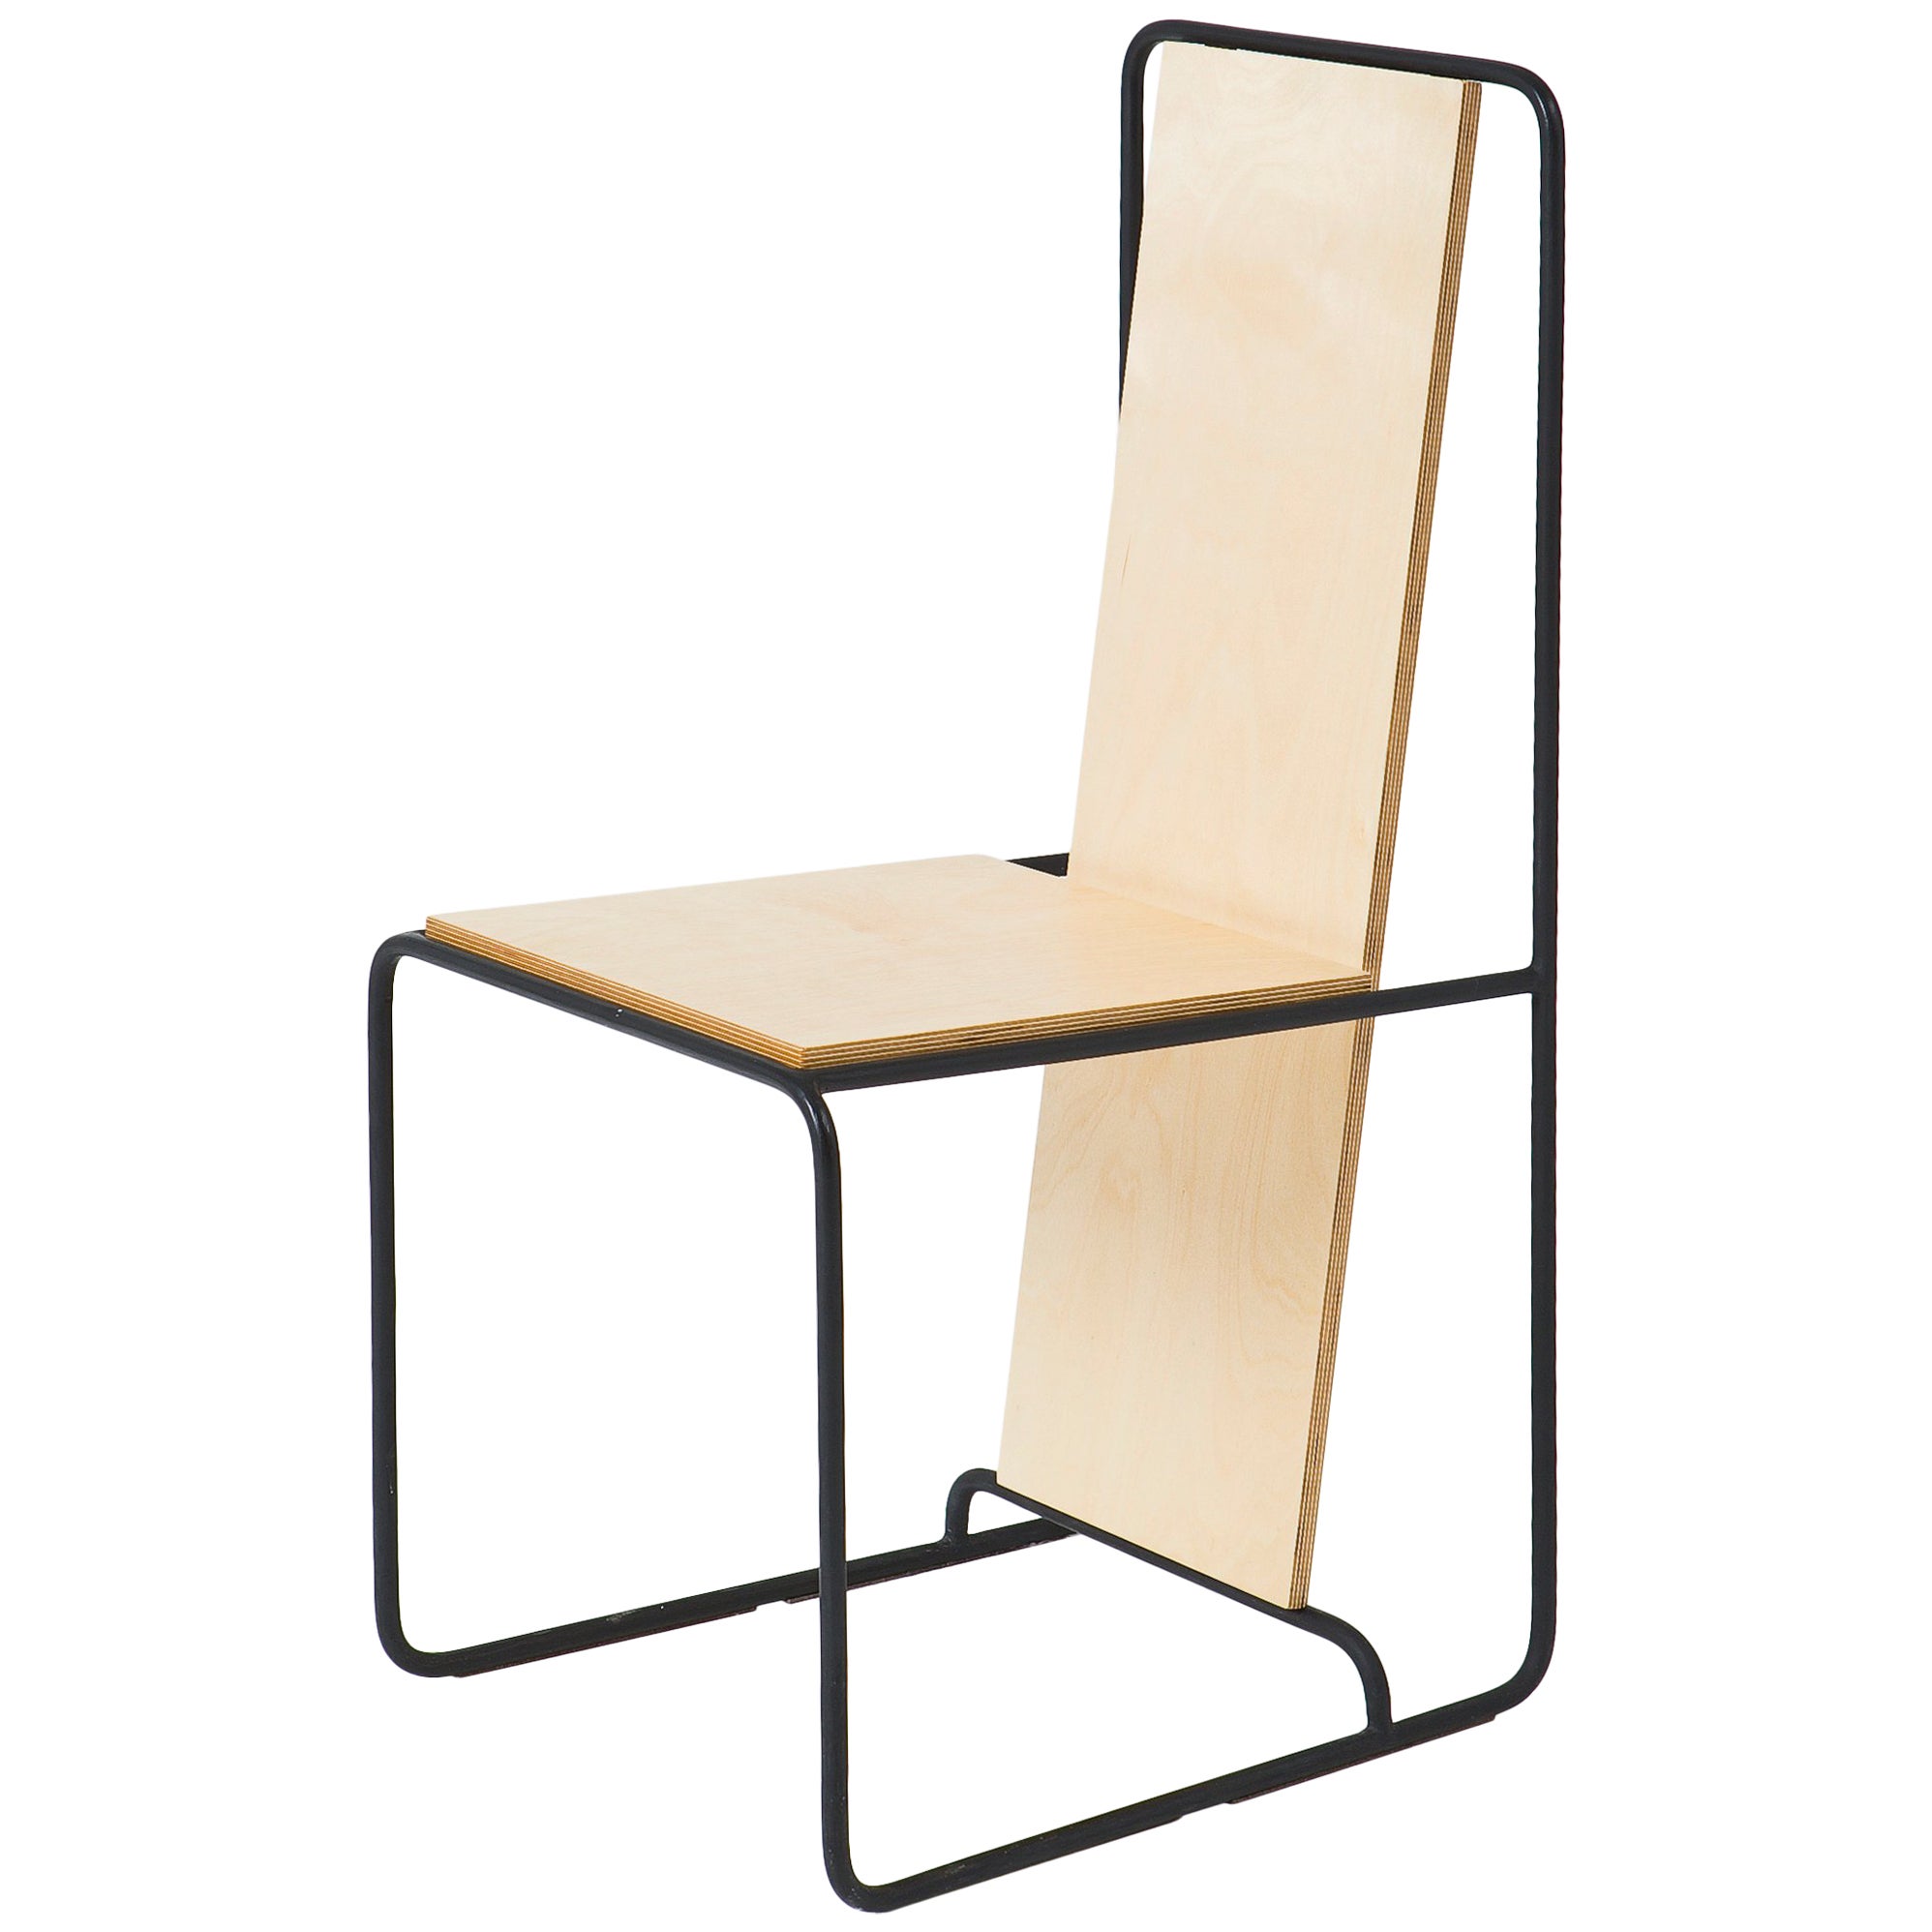 Steltman Chair In Oak Designed In 1963 By Gerrit Rietveld For Sale At 1stdibs